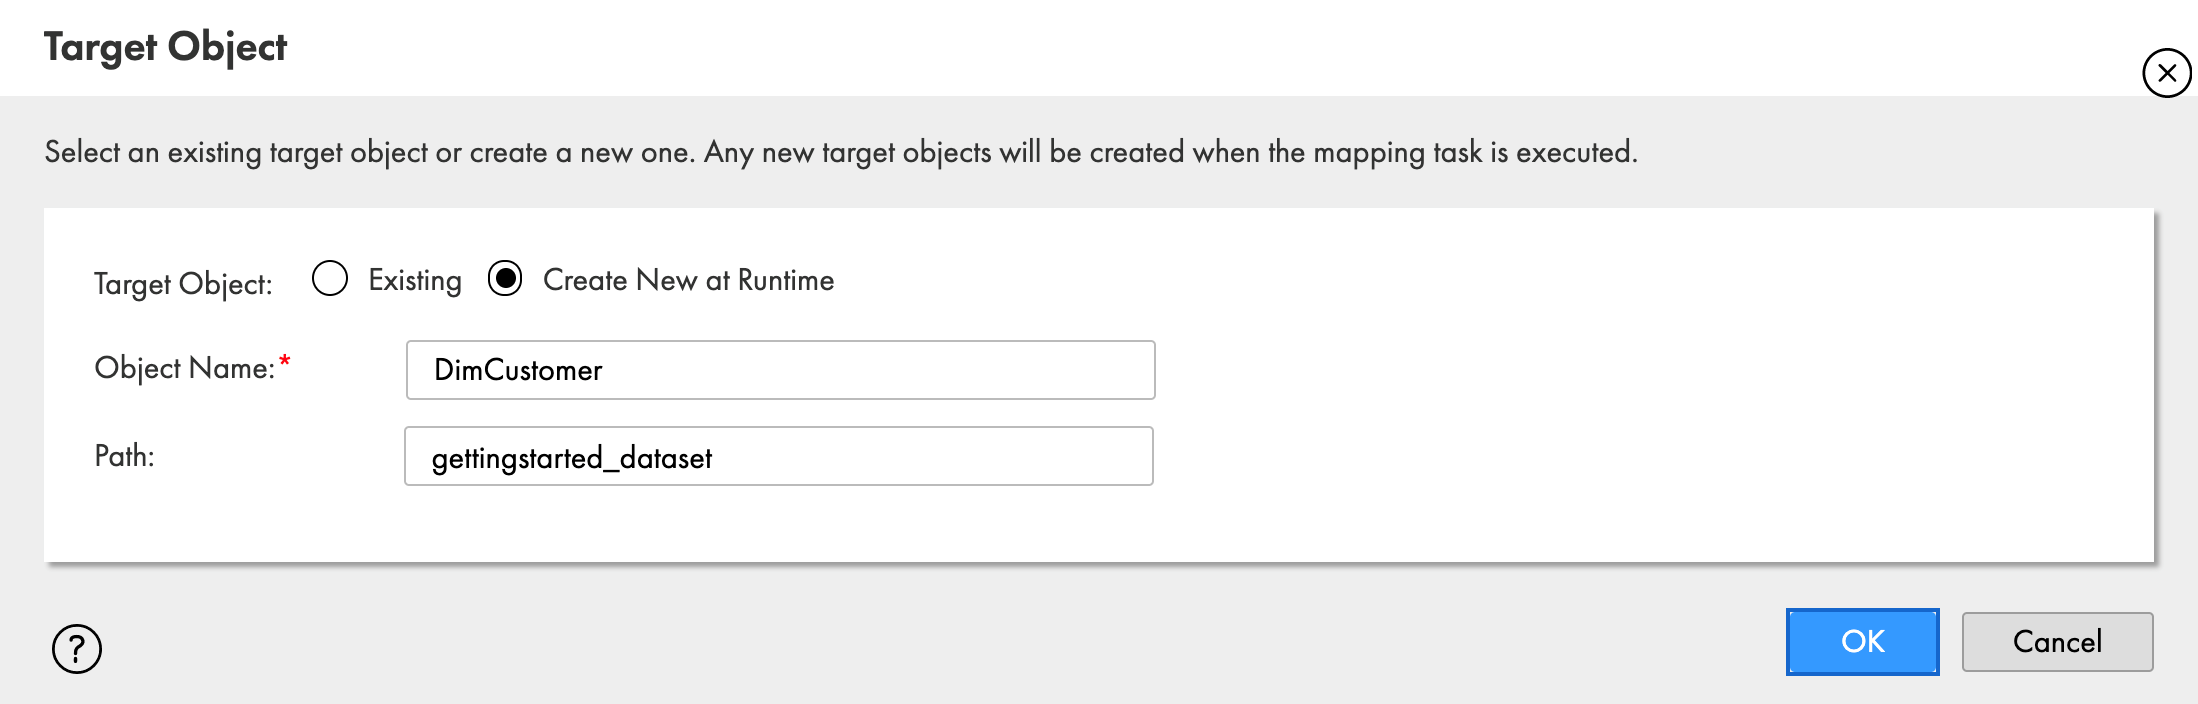 In the Target Object dialog box, the target object is set to "Create New at Runtime." The object name is the name of the target file to be created, and the path is the Google BigQuery dataset where the target table will be created. 
						